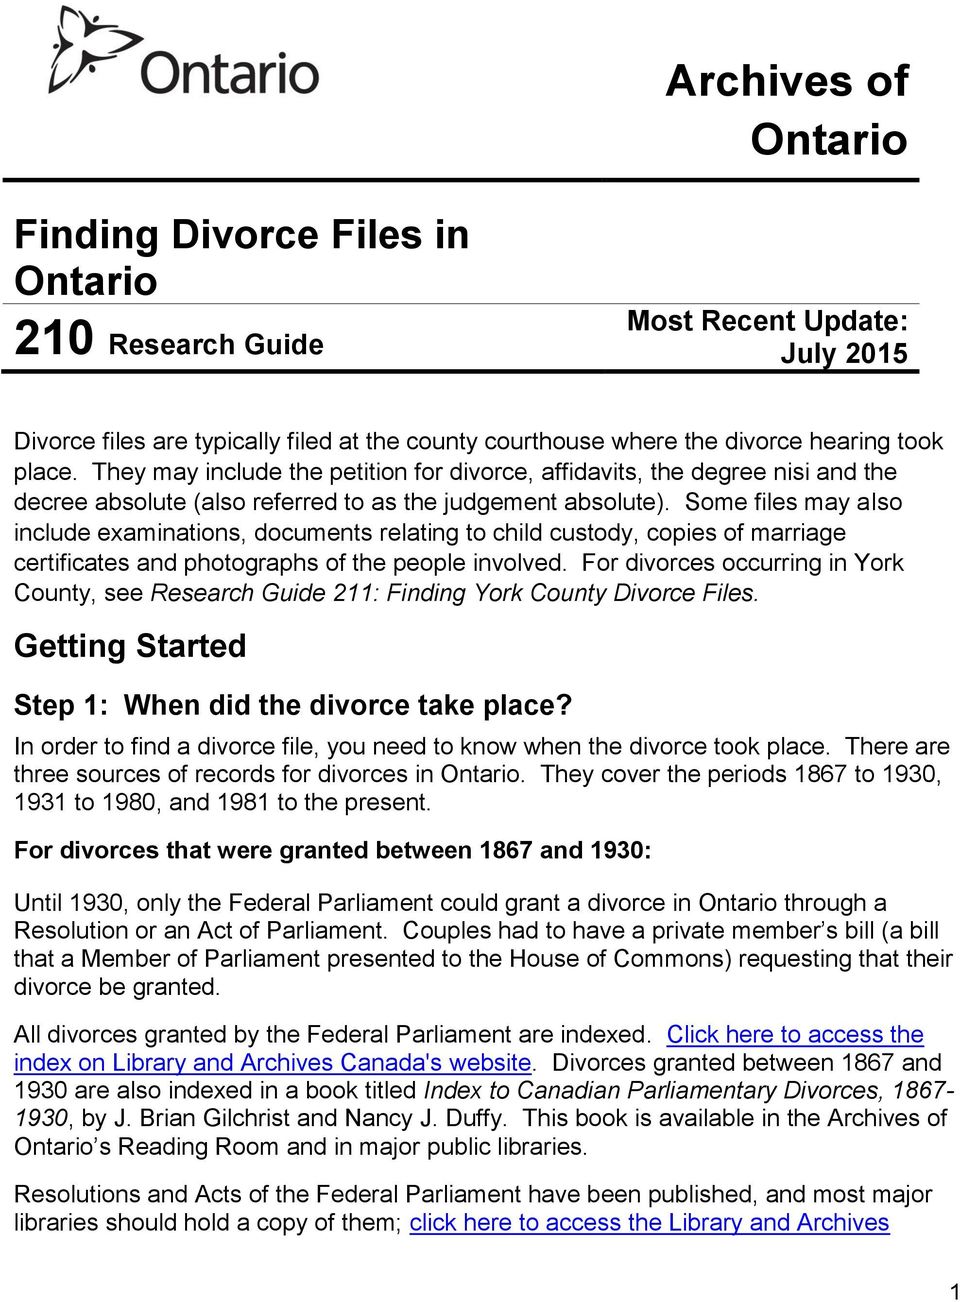 Research paper impact of divorce on